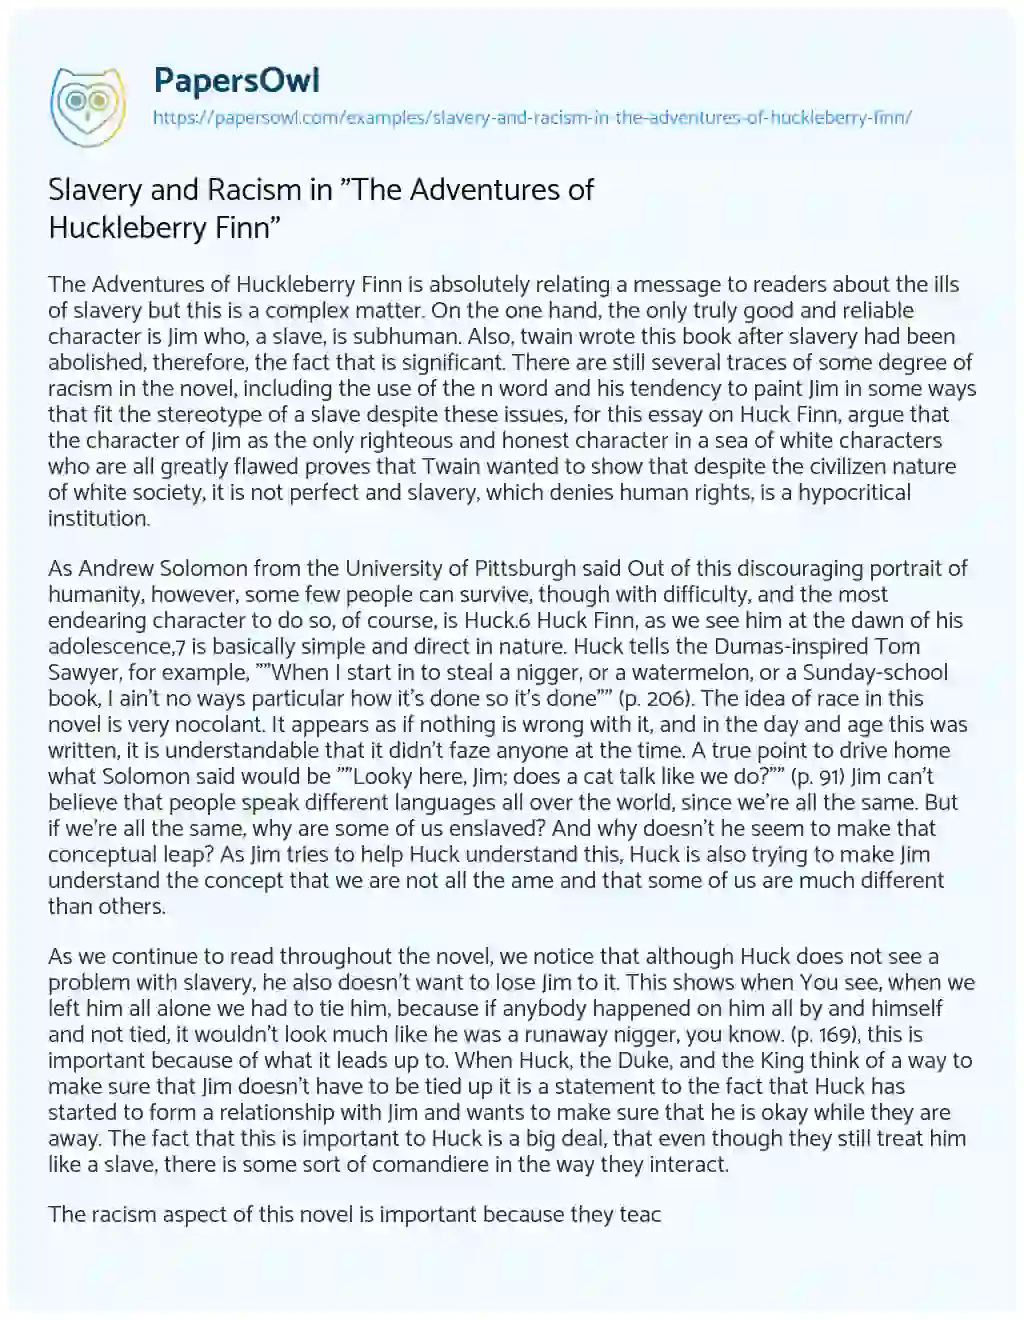 Essay on Slavery and Racism in “The Adventures of Huckleberry Finn”